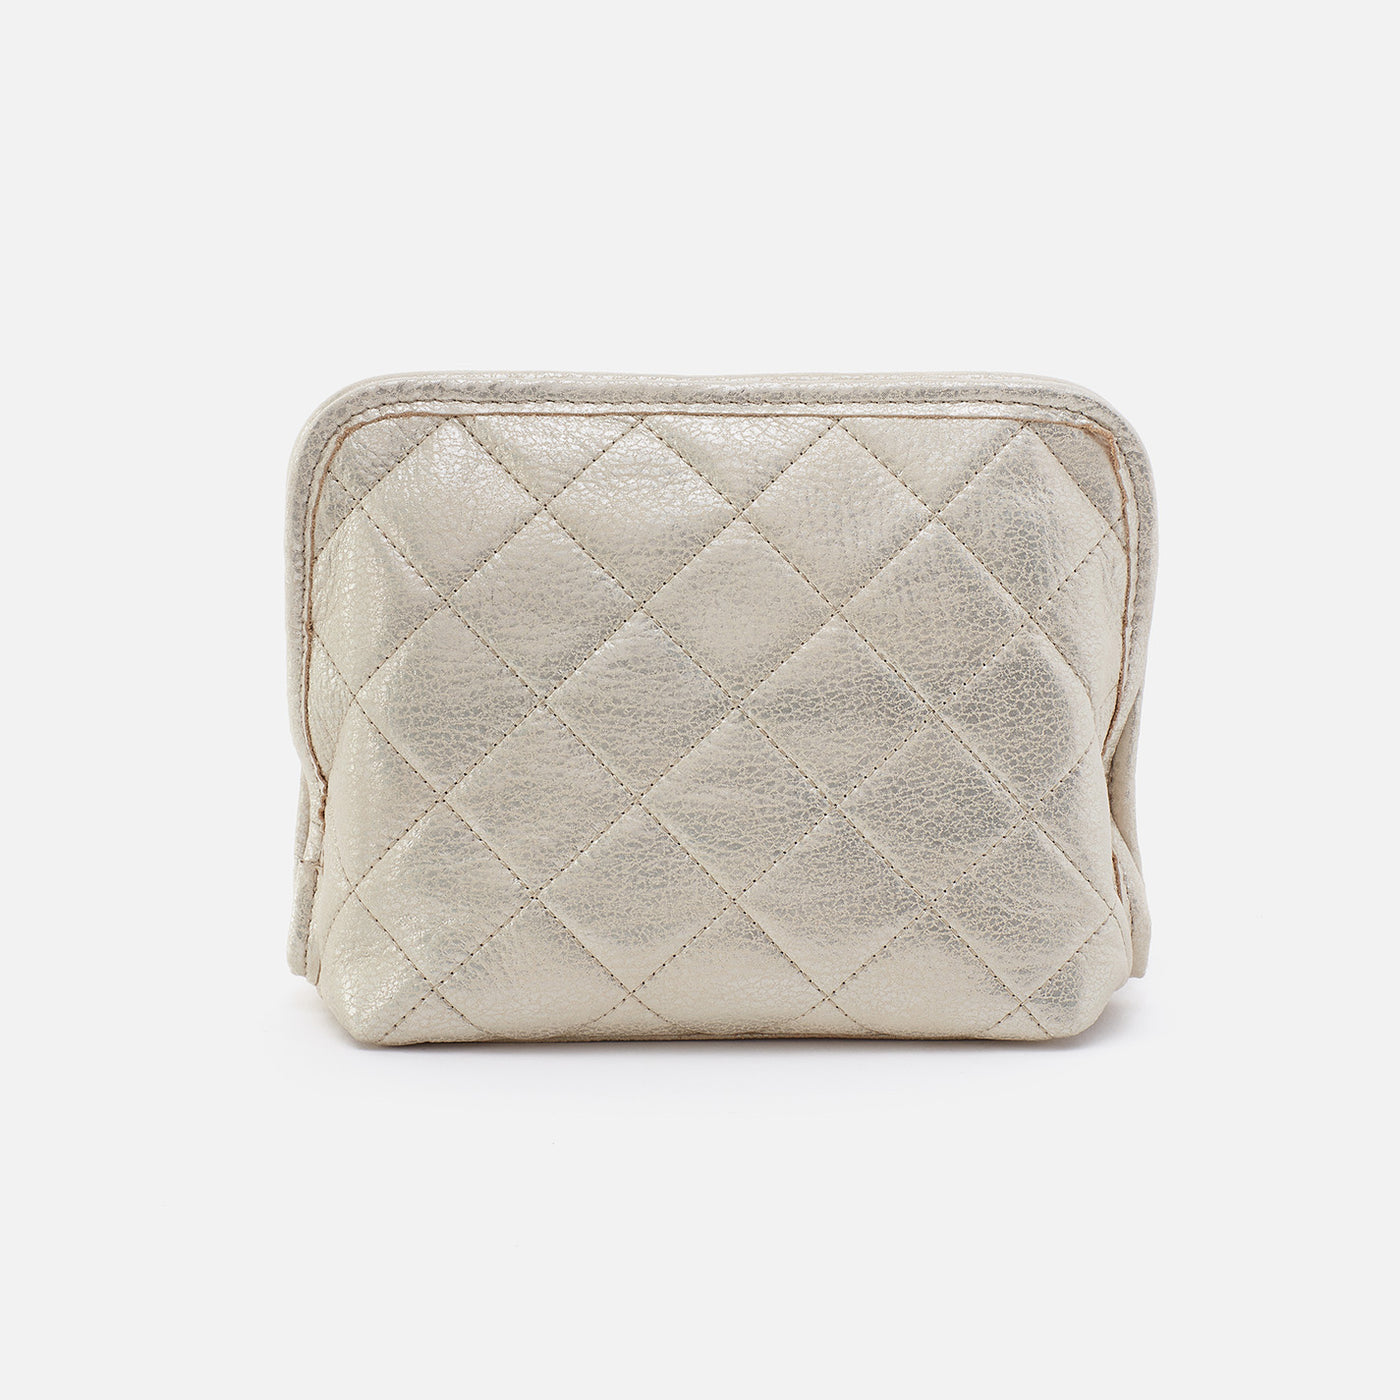 Beauty Cosmetic Pouch in Quilted Metallic Leather - Pearled Silver